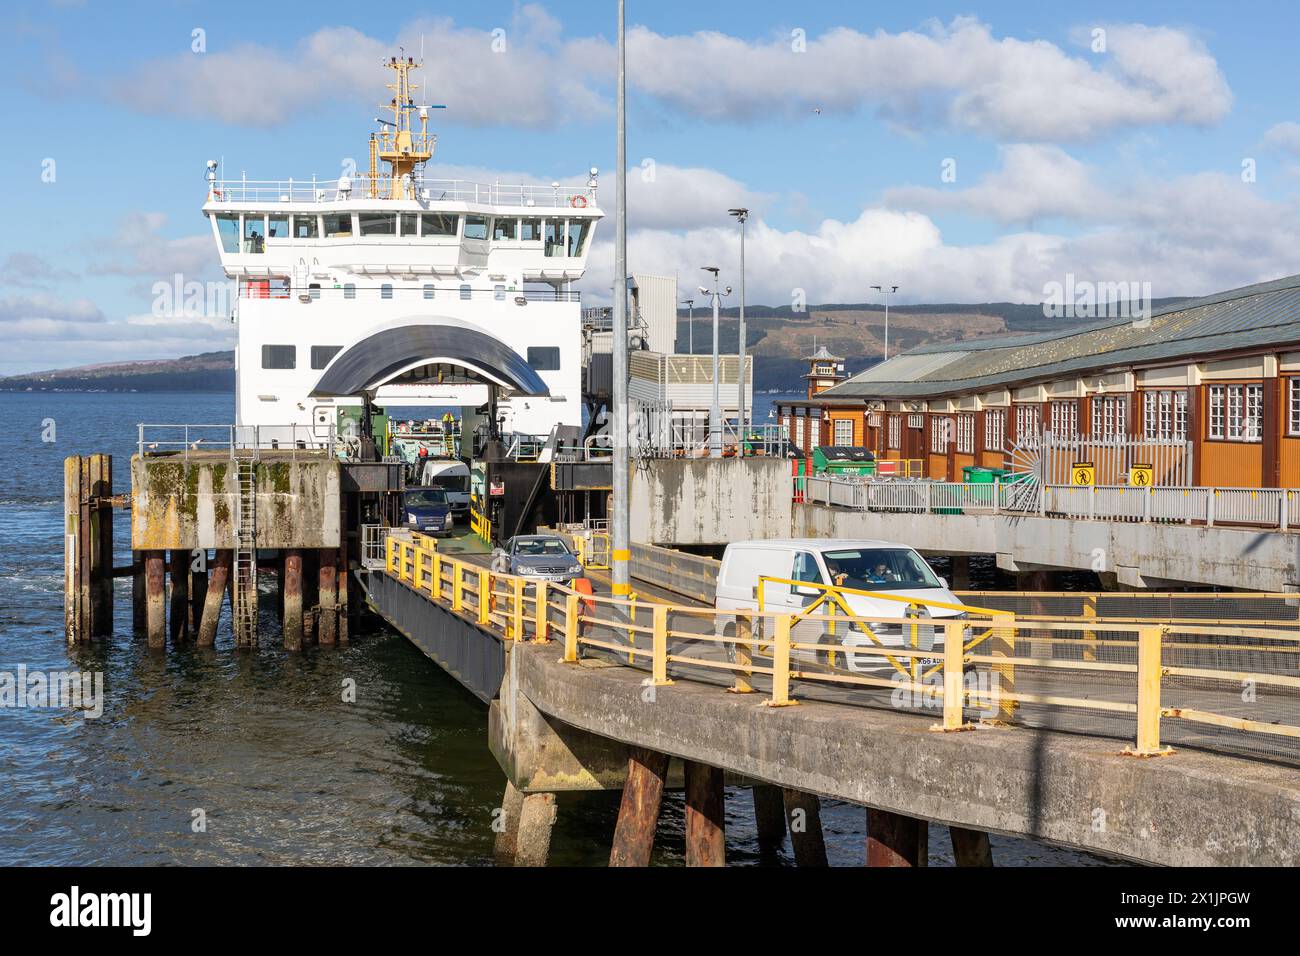 Caledonian Macbrayne MV Argyle, sailing from Rothesay on the Isle of Bute to the terminal at Wemyss Bay, across the Firth of Clyde, Stock Photo